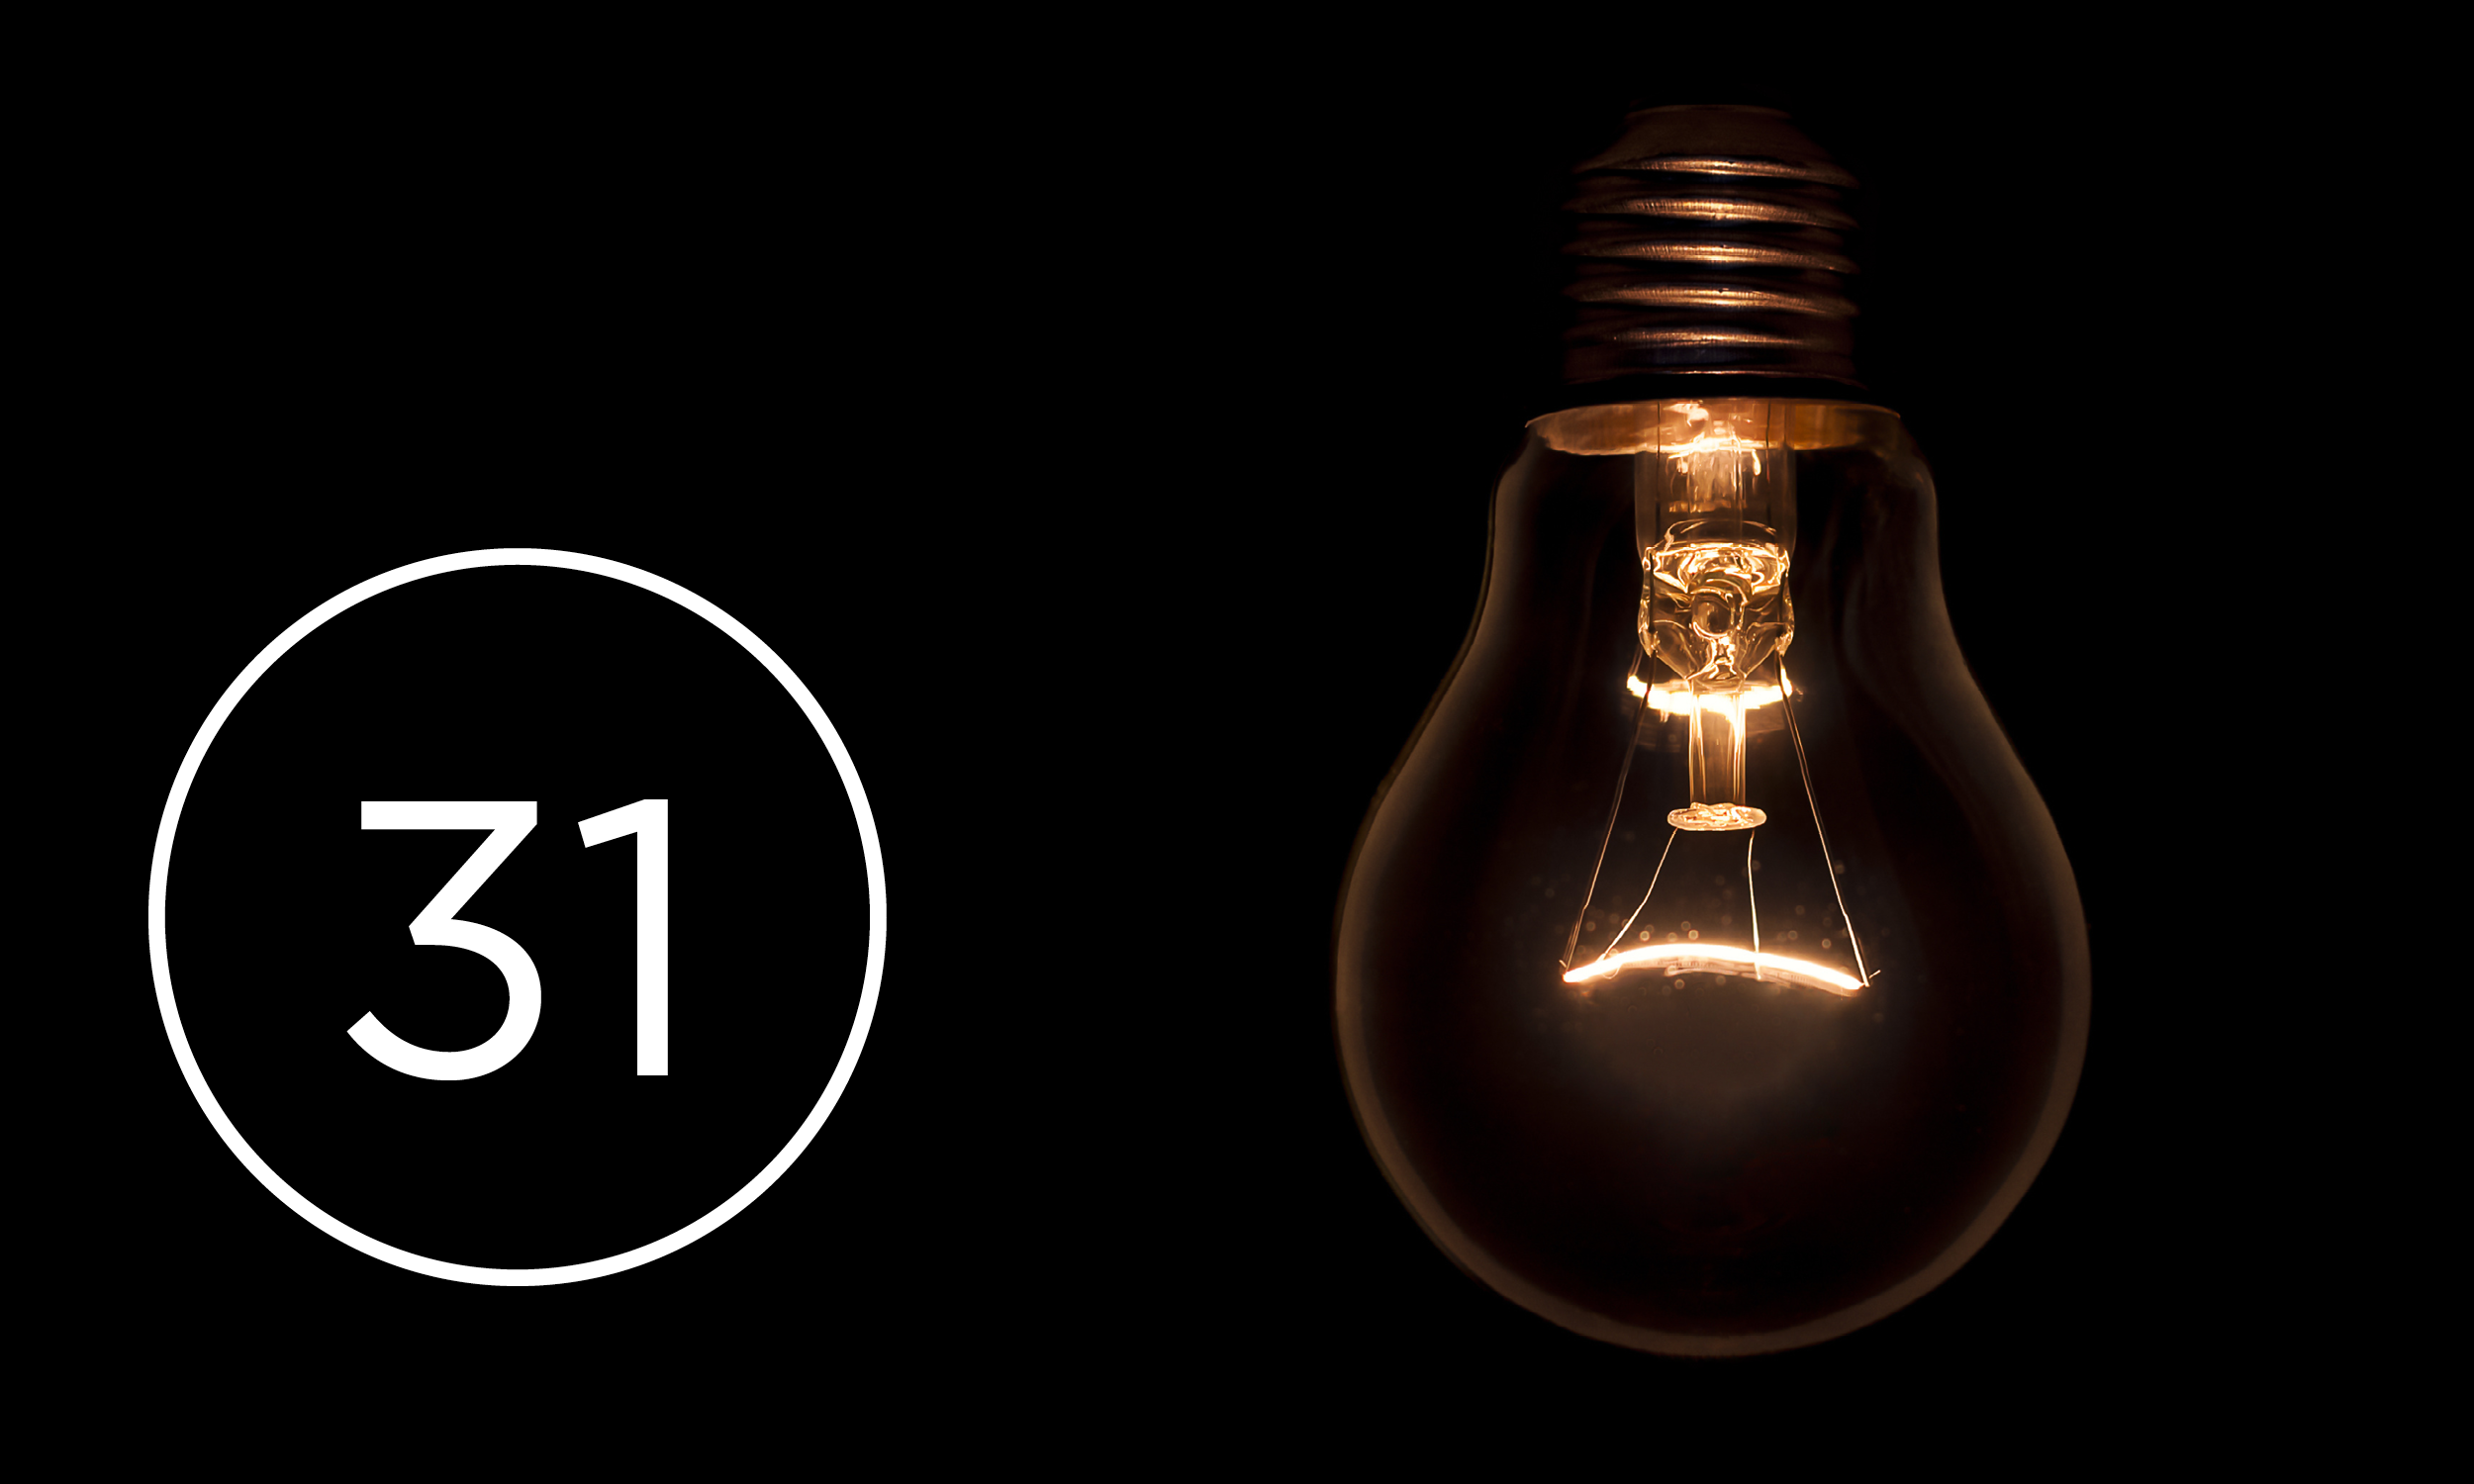 Lightbulb with number 31